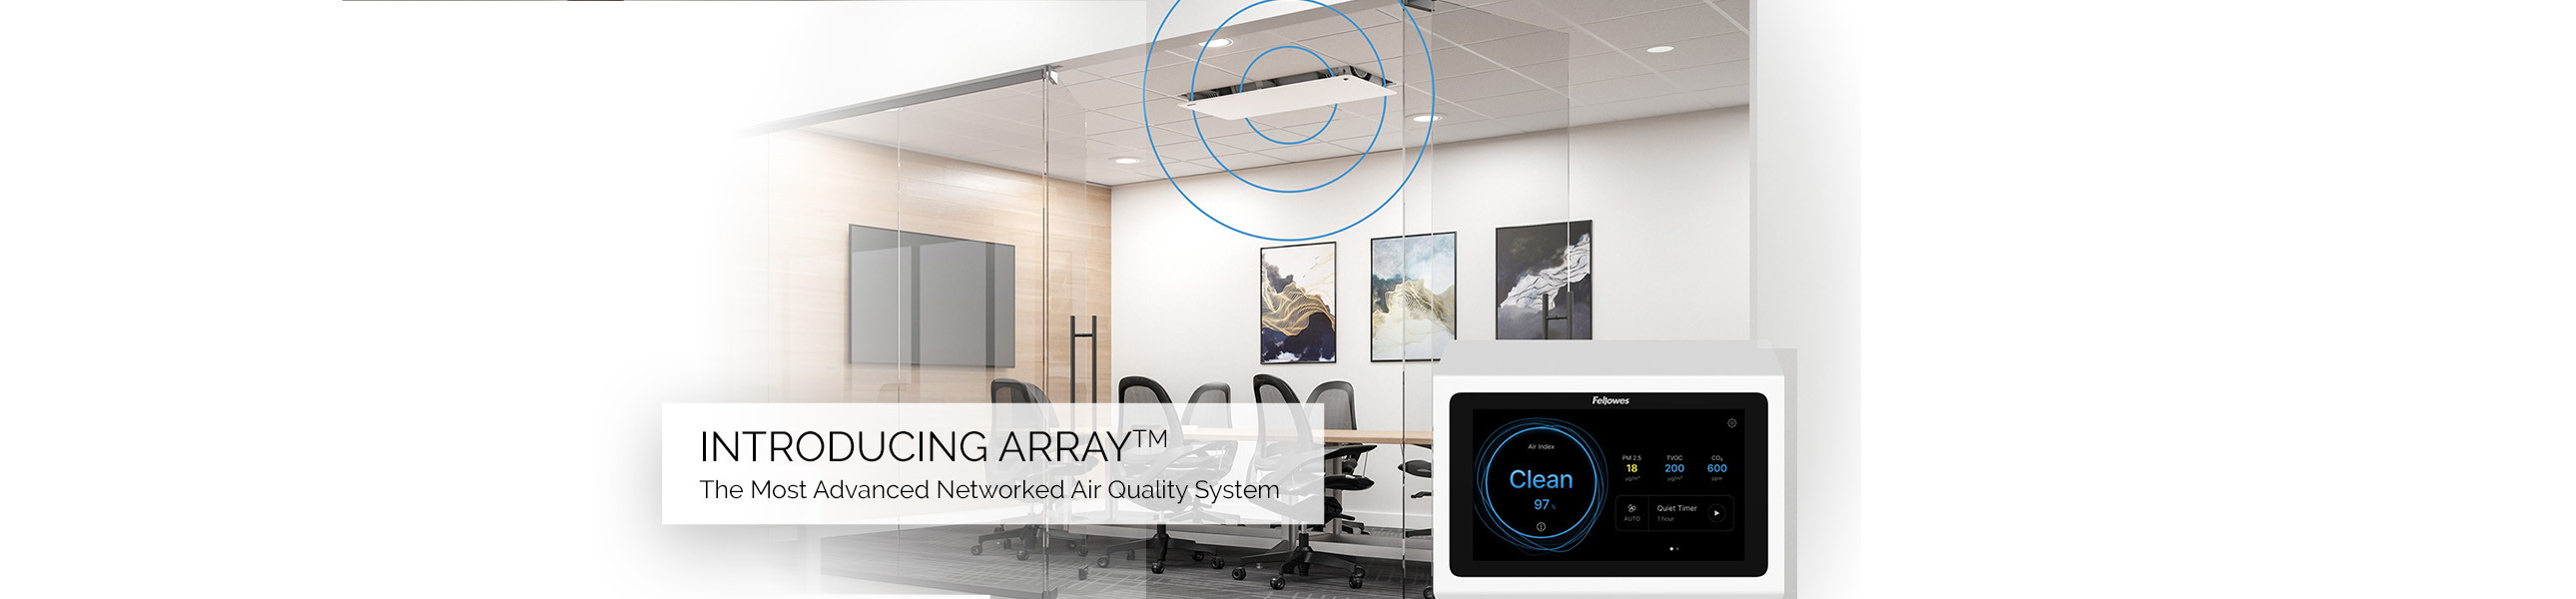 Introducing Array - The Most Advanced Networked Air Quality System